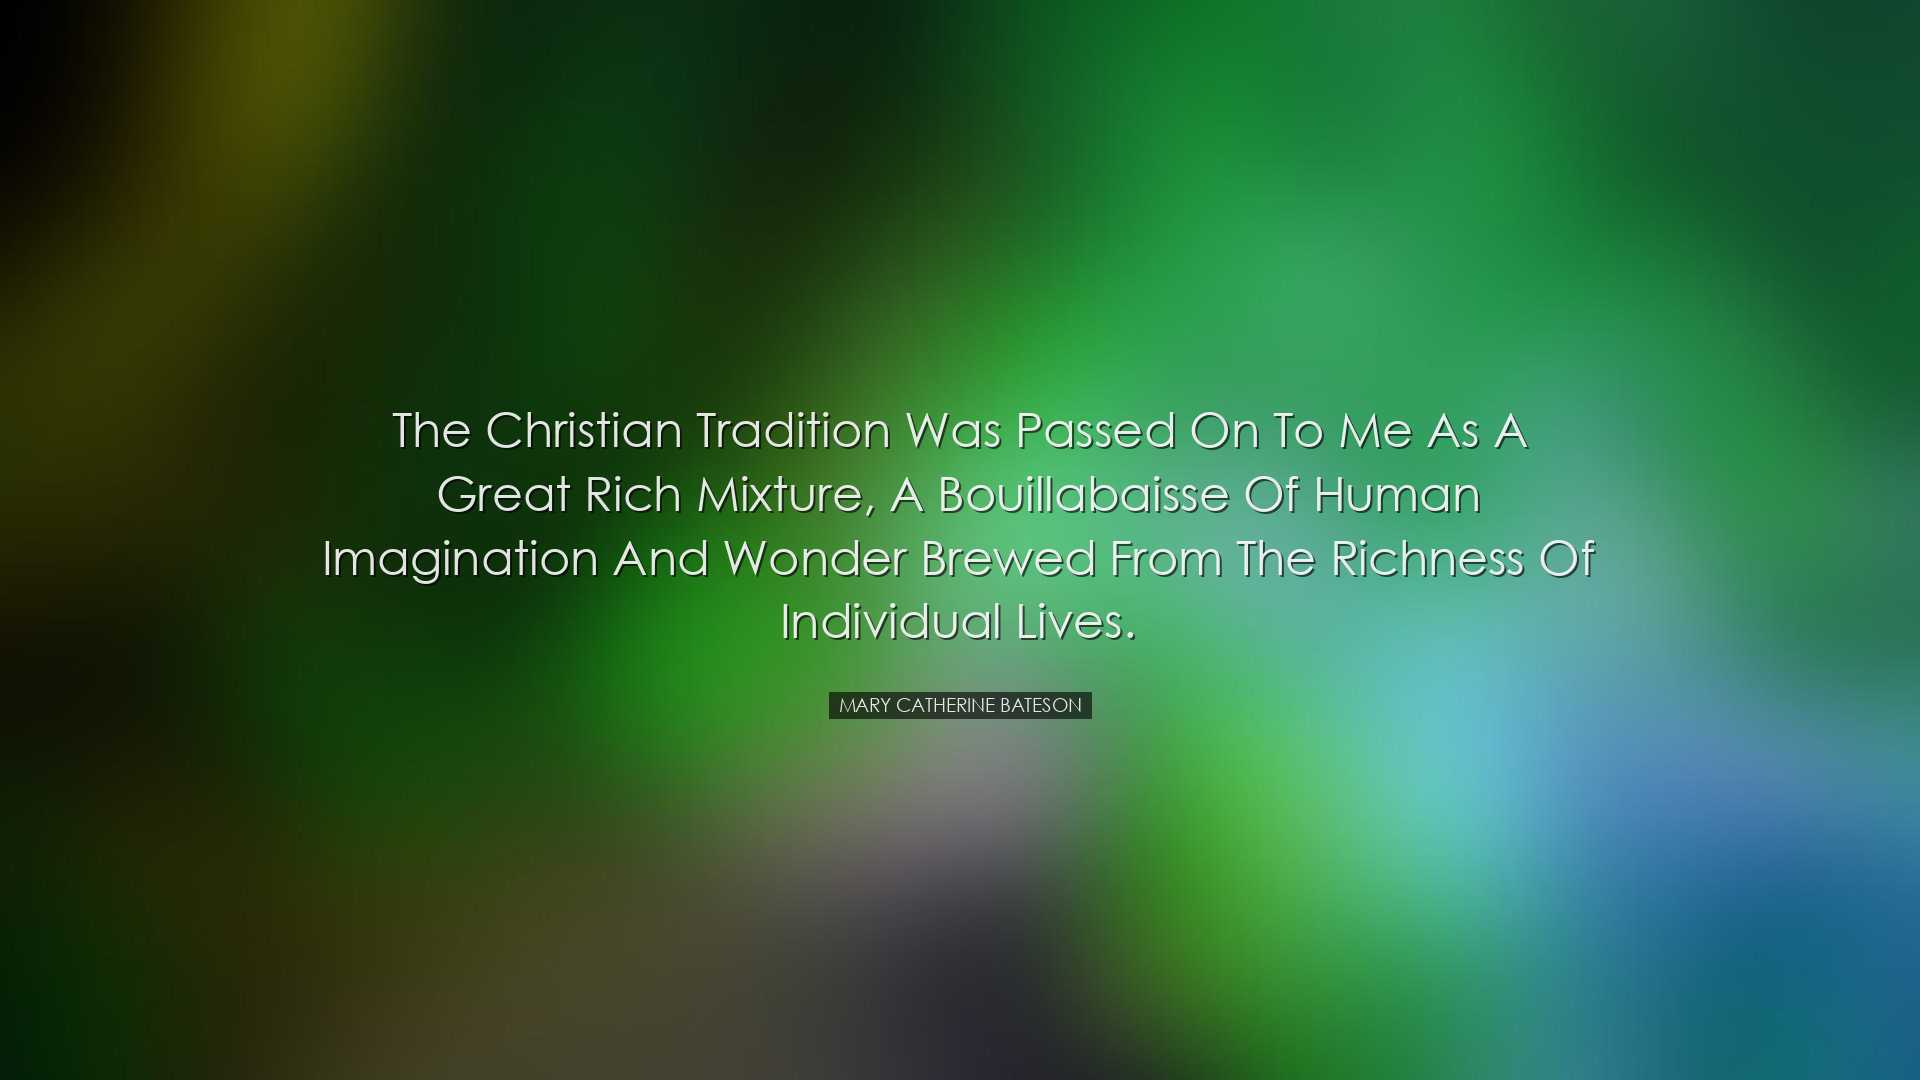 The Christian tradition was passed on to me as a great rich mixtur